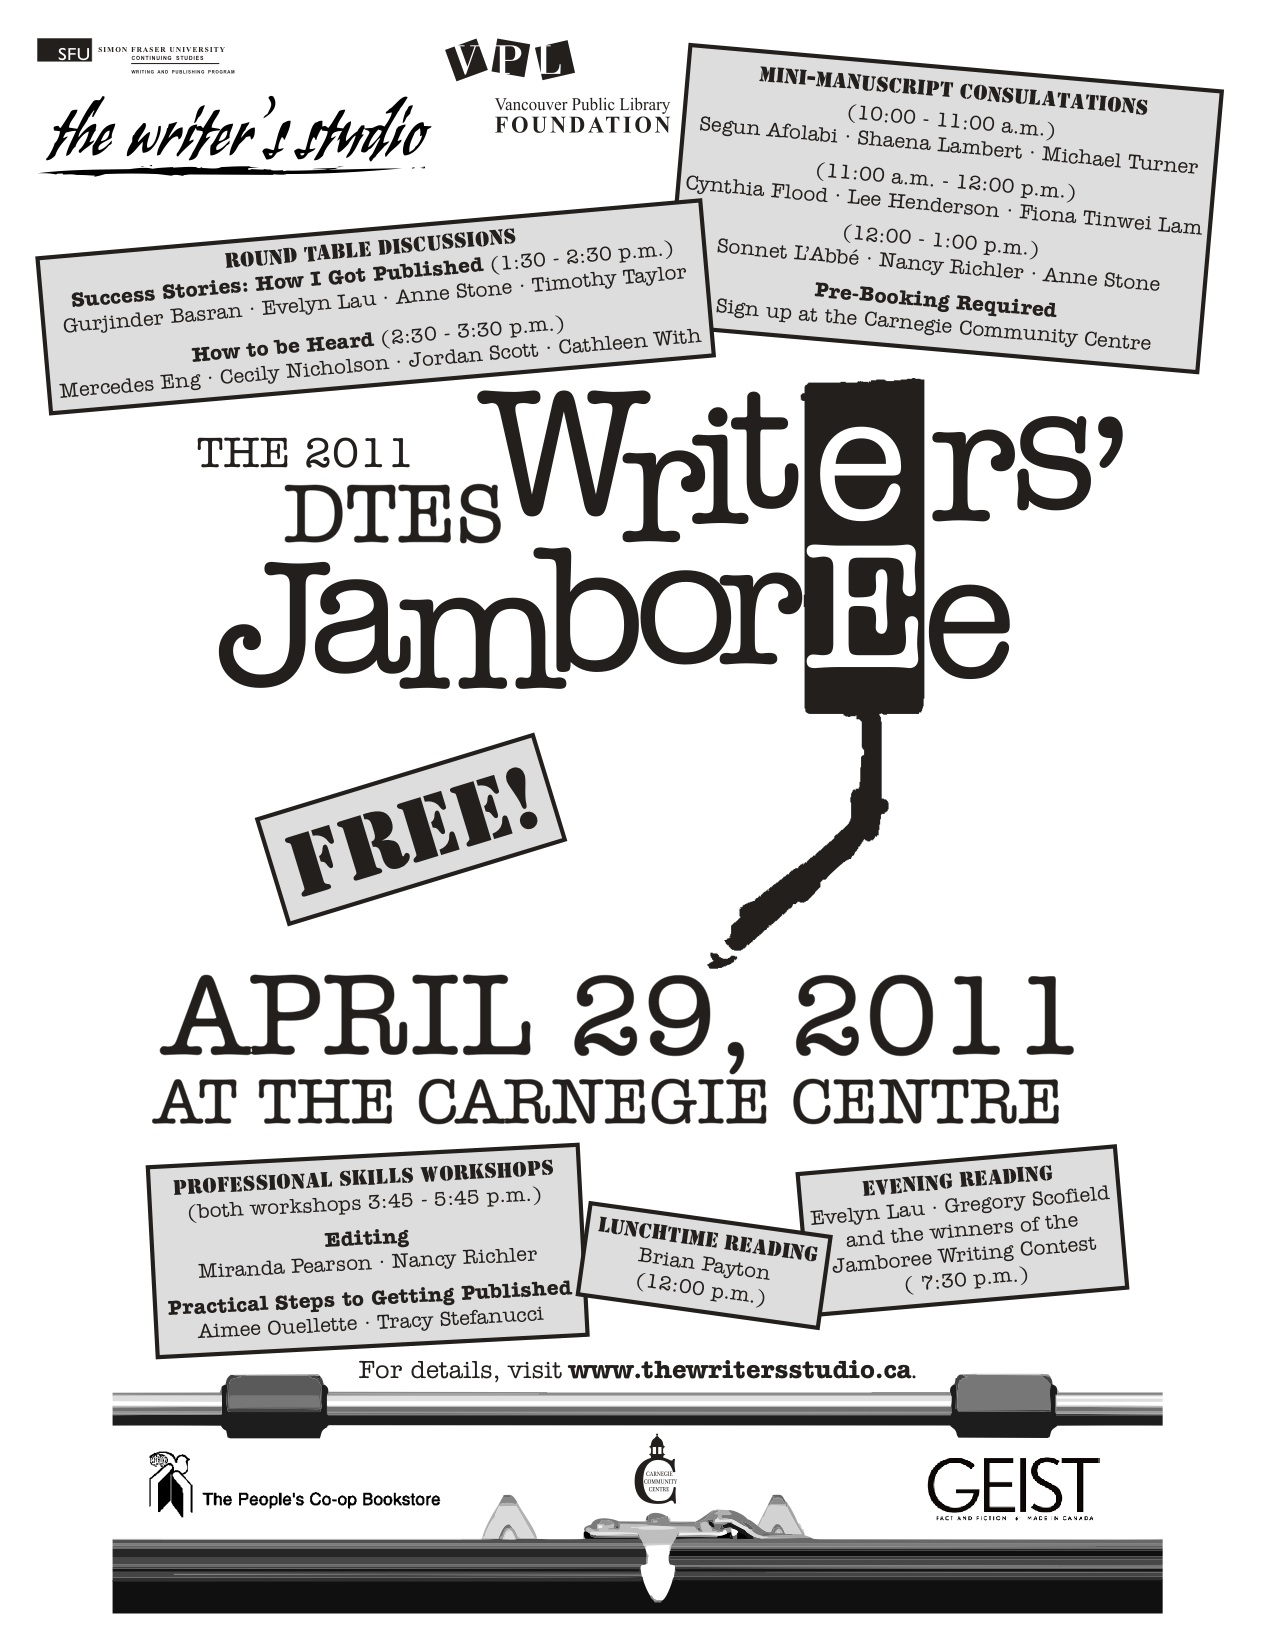 DTES Writers’ Jamboree is this Friday